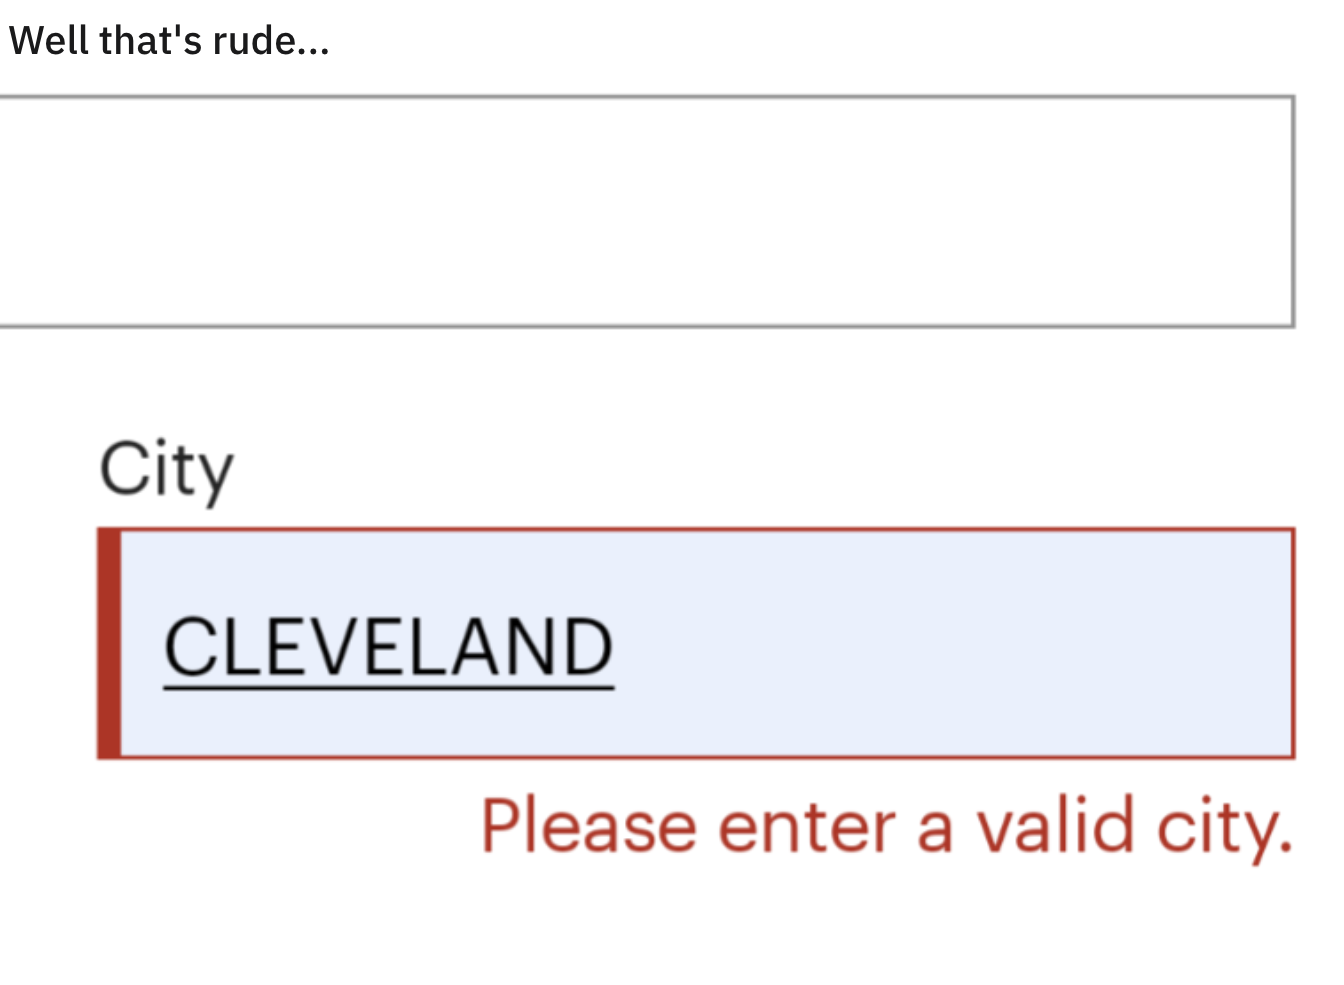 Ohio Memes - angle - Well that's rude... City Cleveland Please enter a valid city.